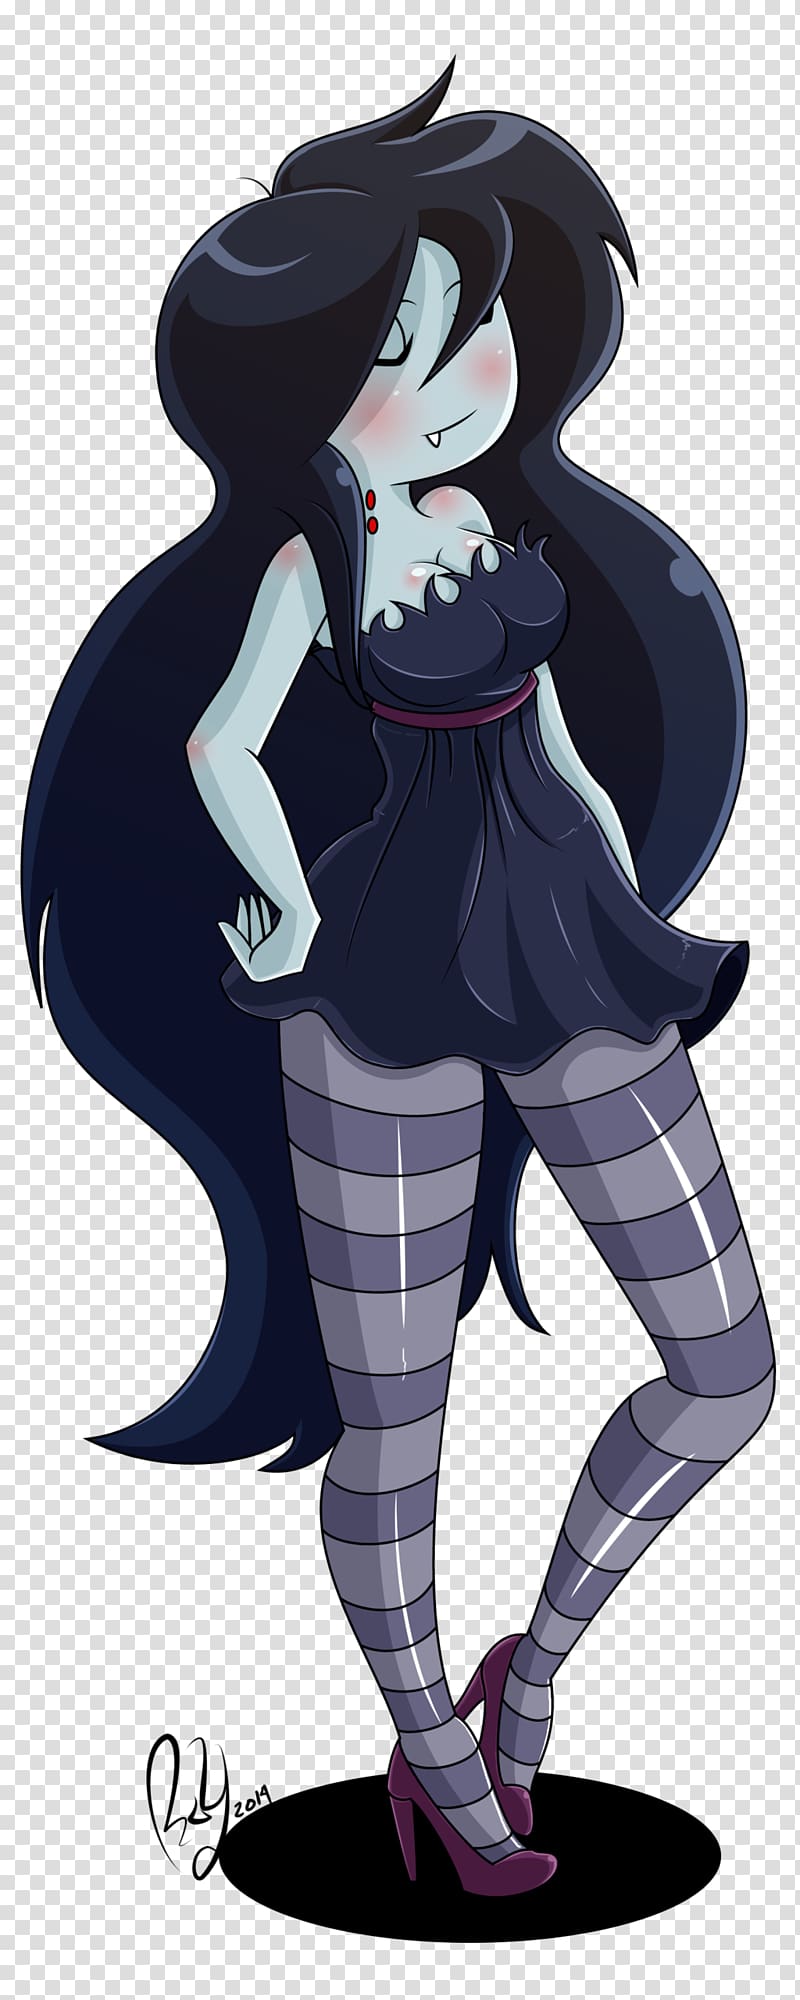 Marceline the Vampire Queen Adventure Time: Explore the Dungeon Because I Don\'t Know! Henchman Cartoon Network , others transparent background PNG clipart